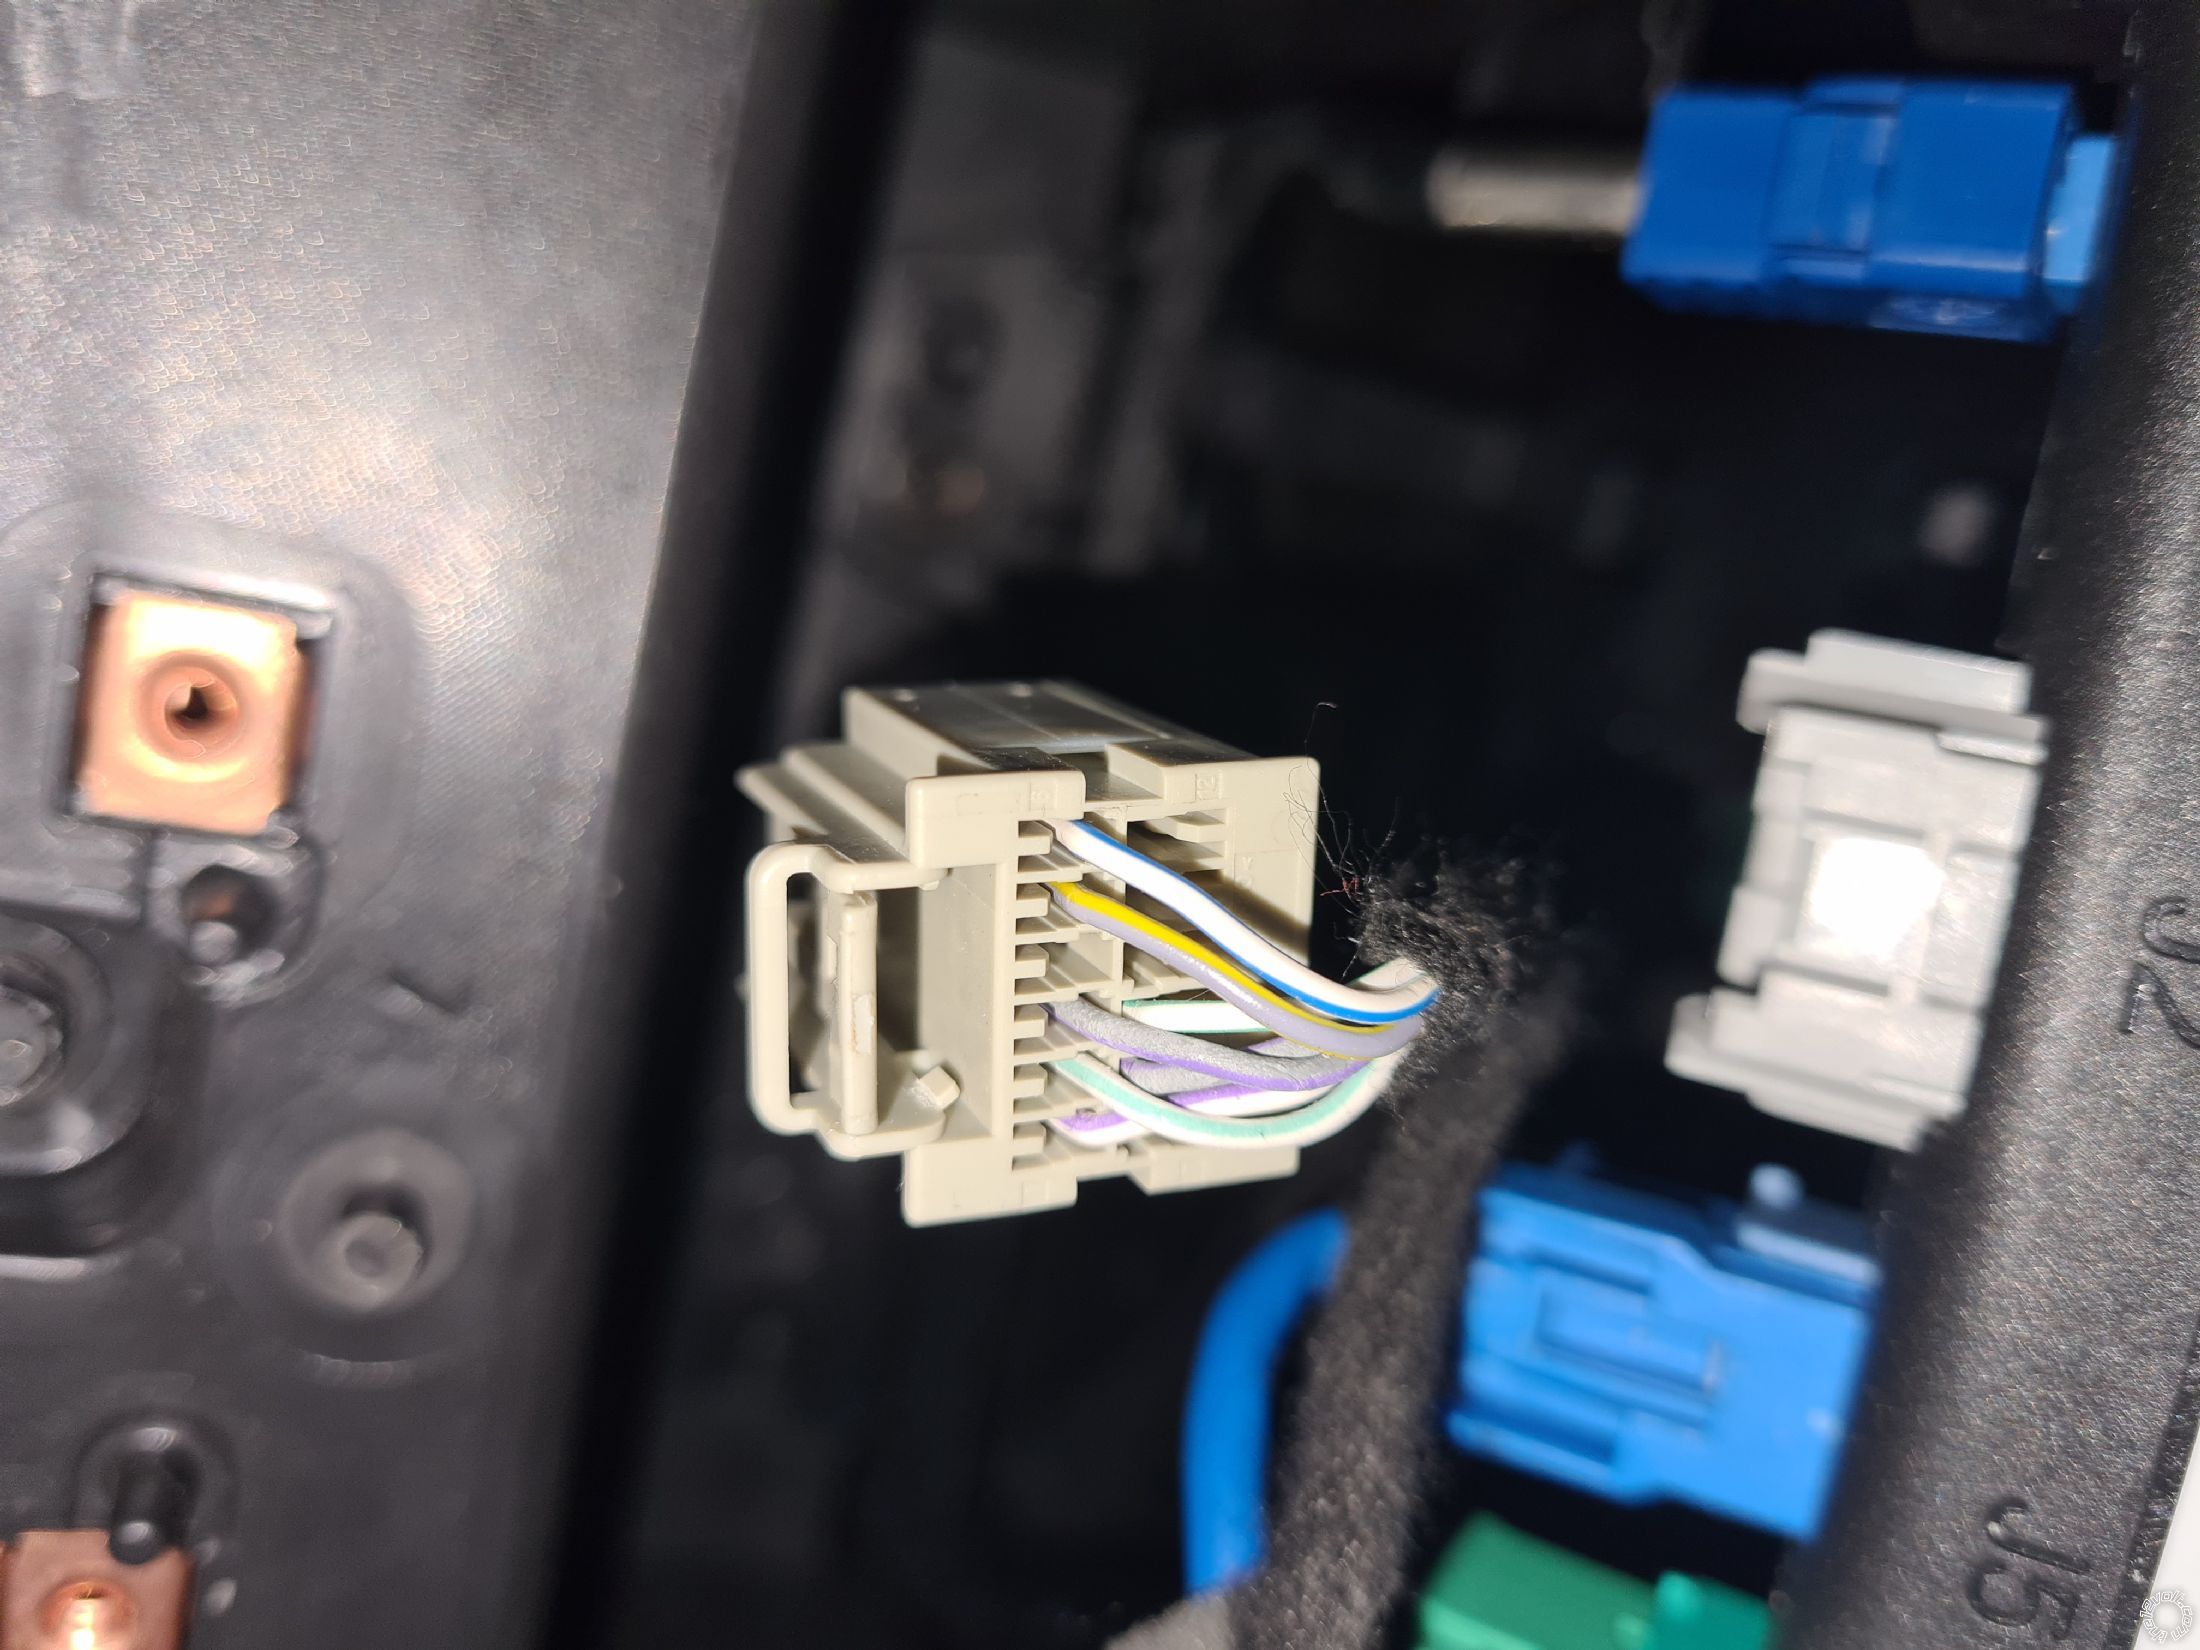 2018 Opel Mokka X Stereo Wiring -- posted image.